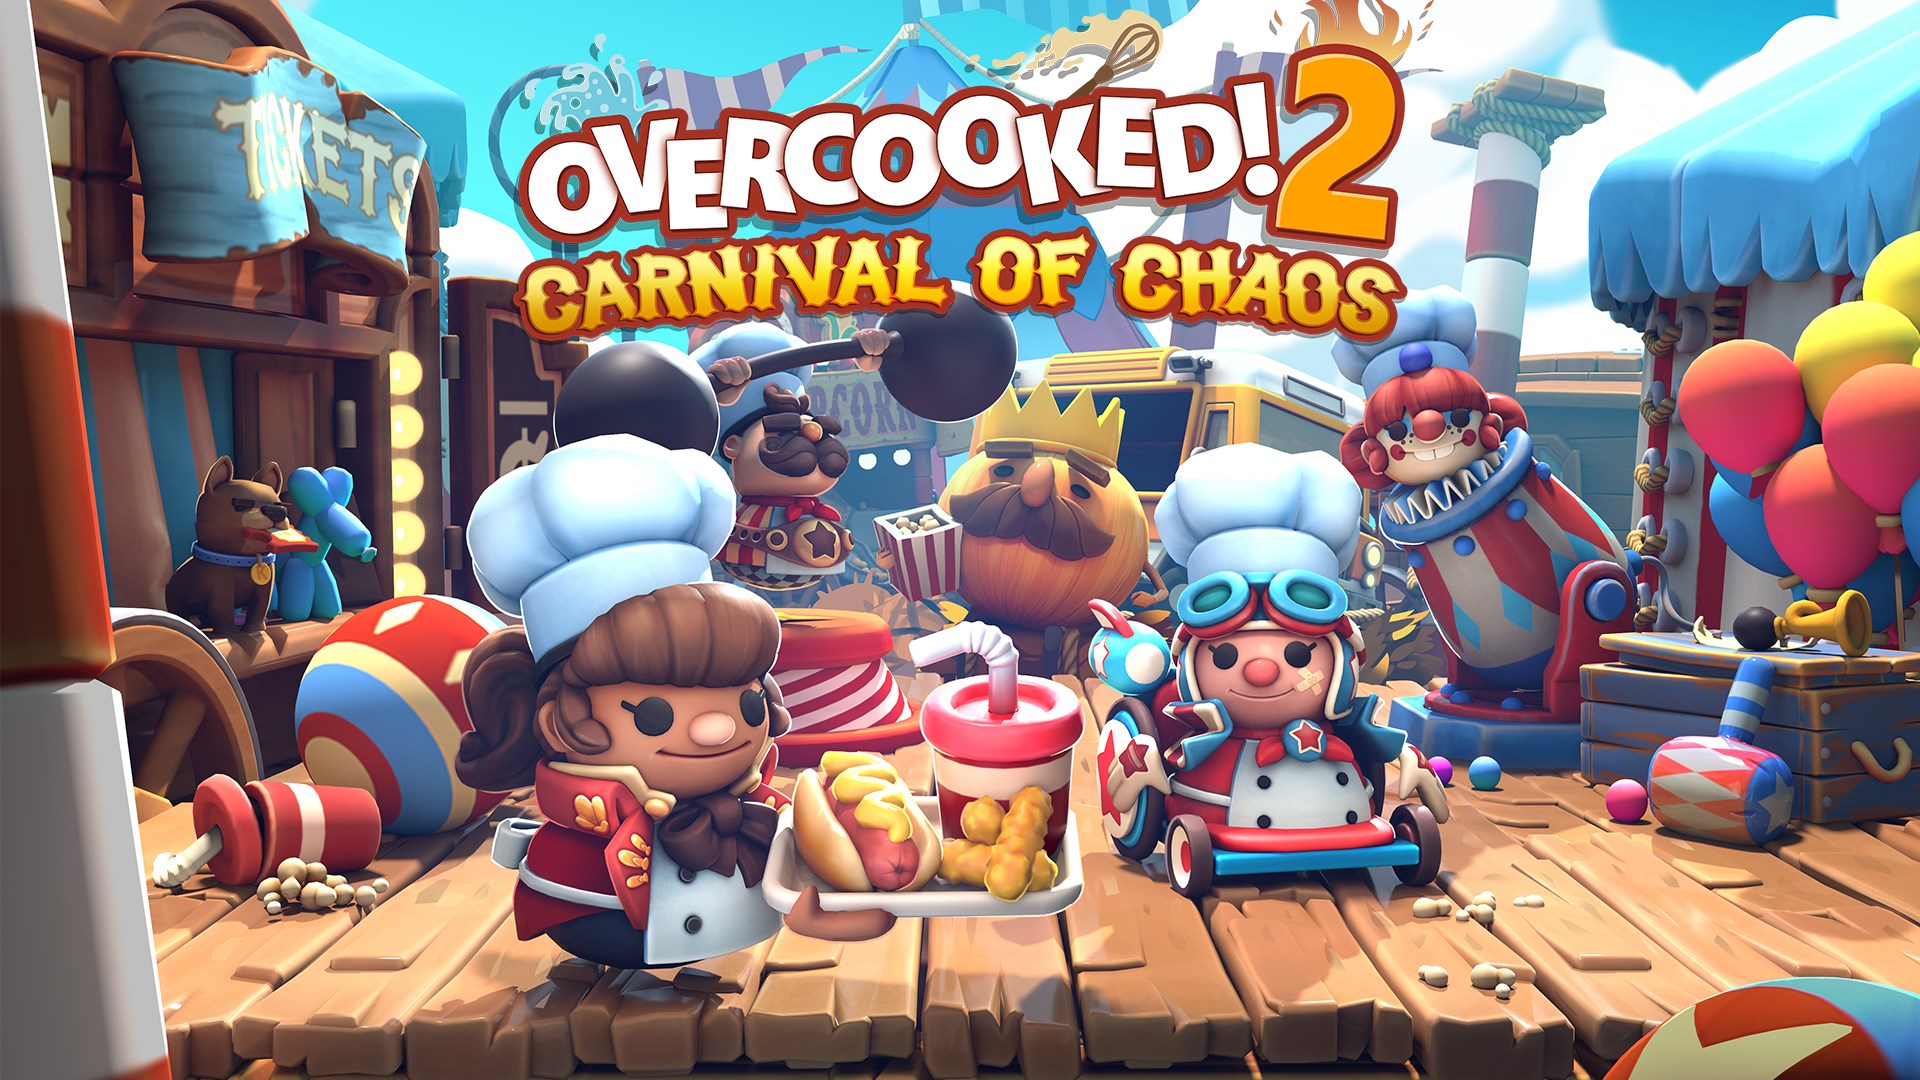 Overcooked 2: Carnival of Chaos